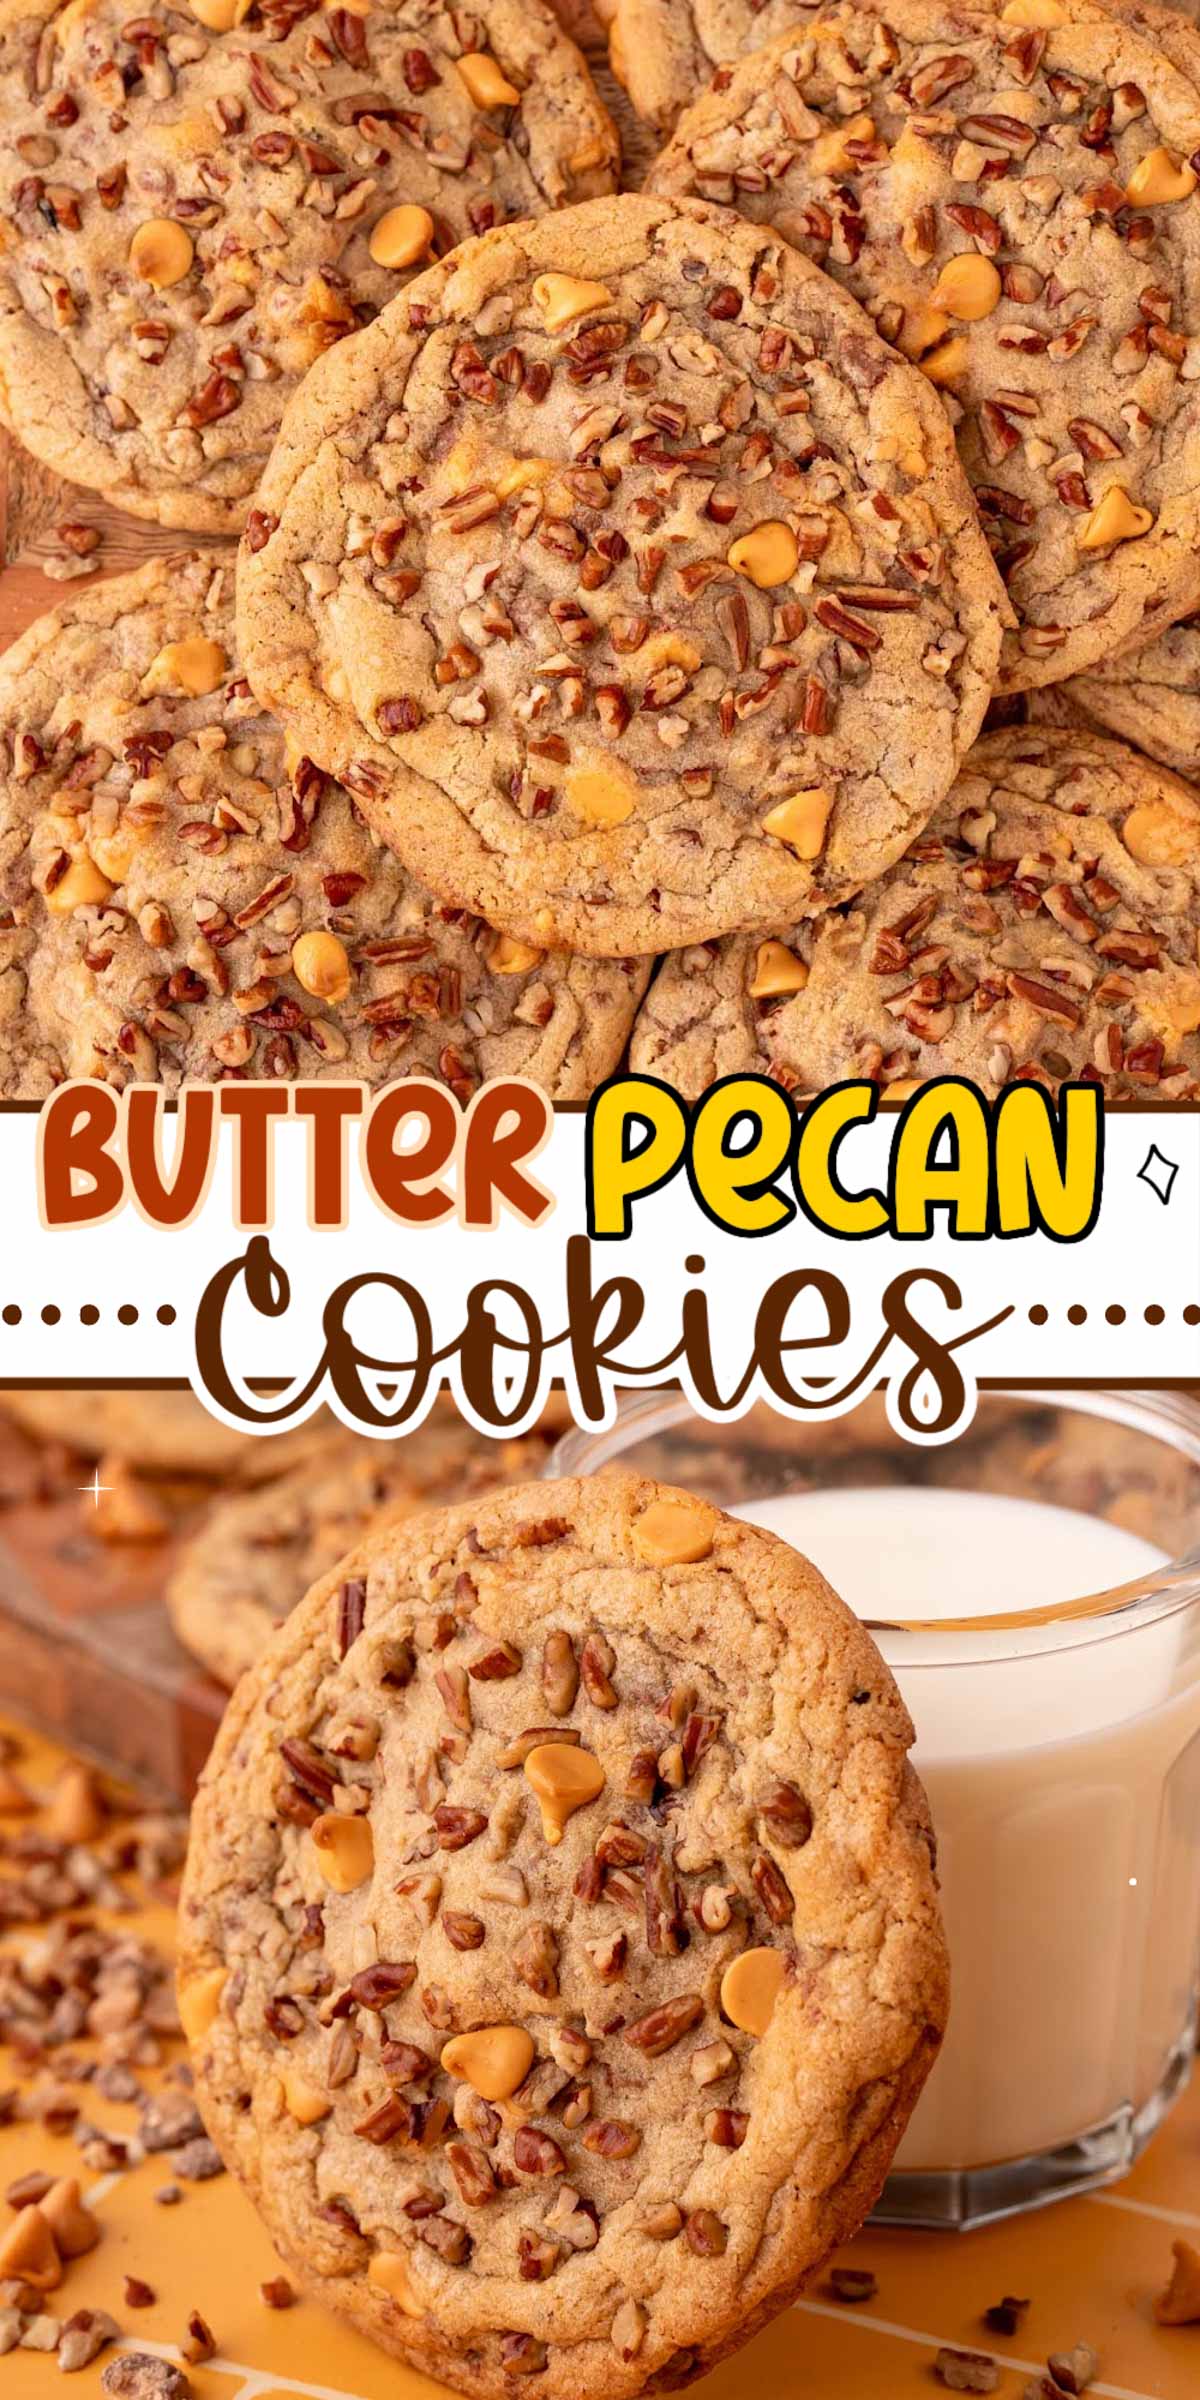 Butter Pecan Cookies are large, bakery-style cookies that are easy to make and are loaded with chopped pecans, toffee bits, and butterscotch chips! No chilling required and ready in under 30 minutes! via @sugarandsoulco